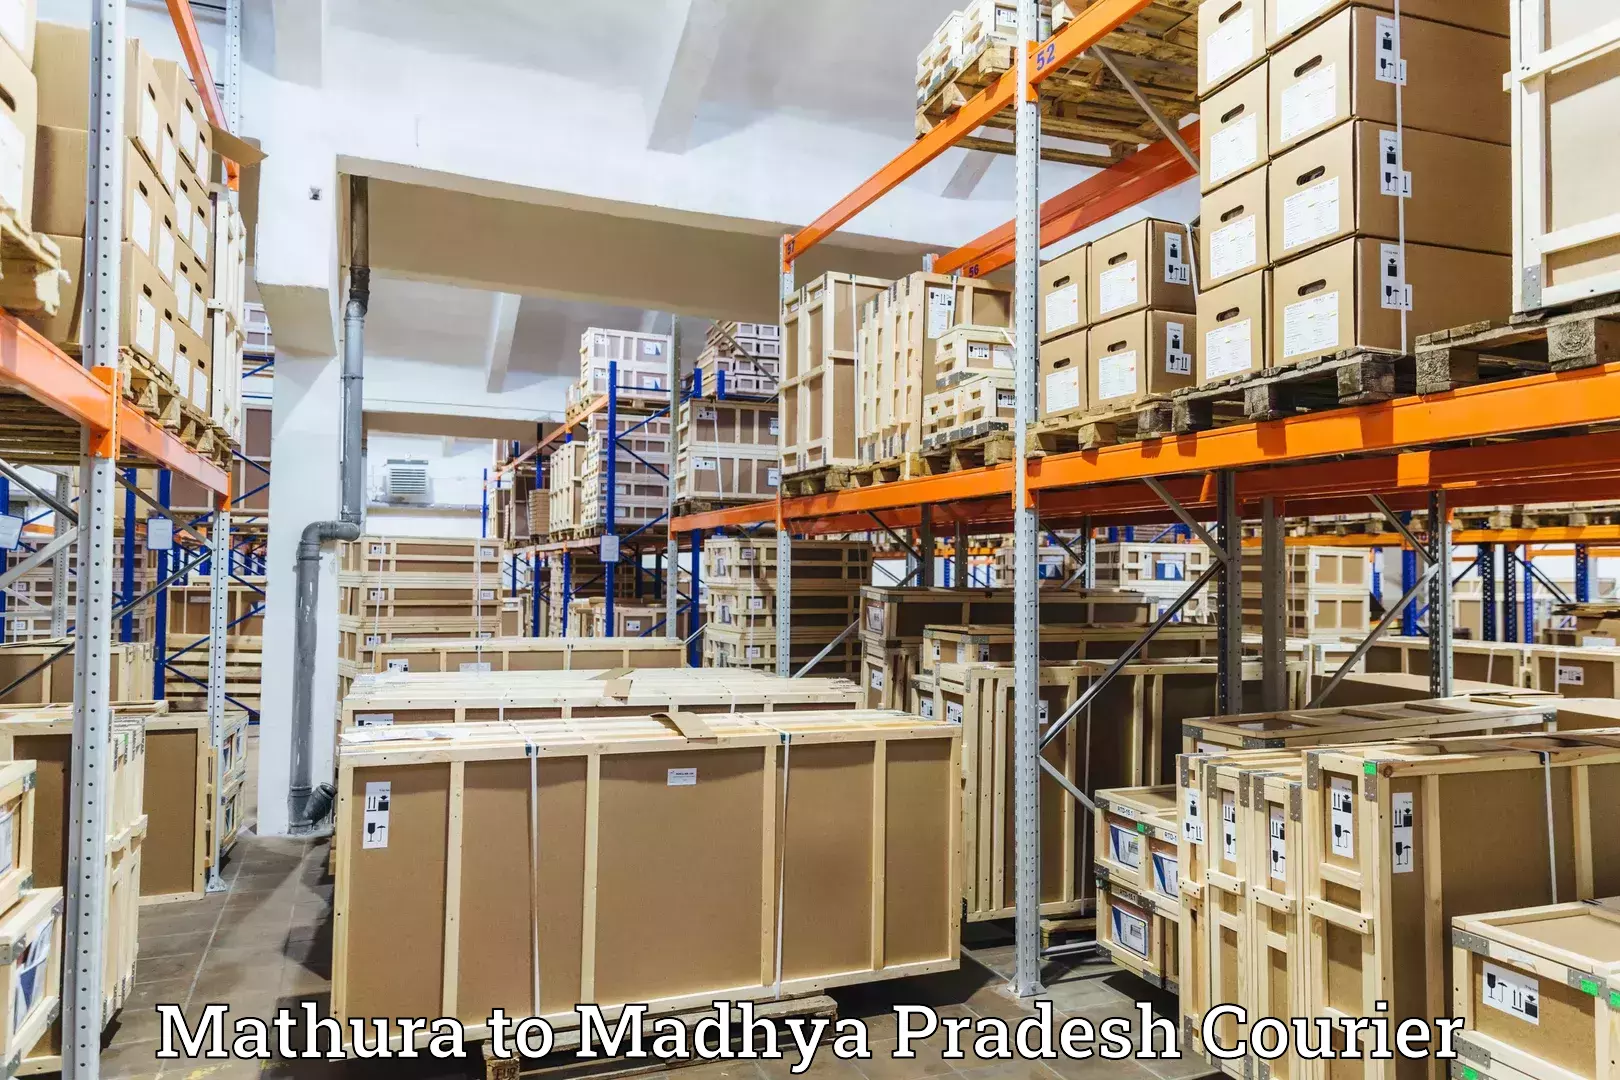 State-of-the-art courier technology Mathura to Anuppur